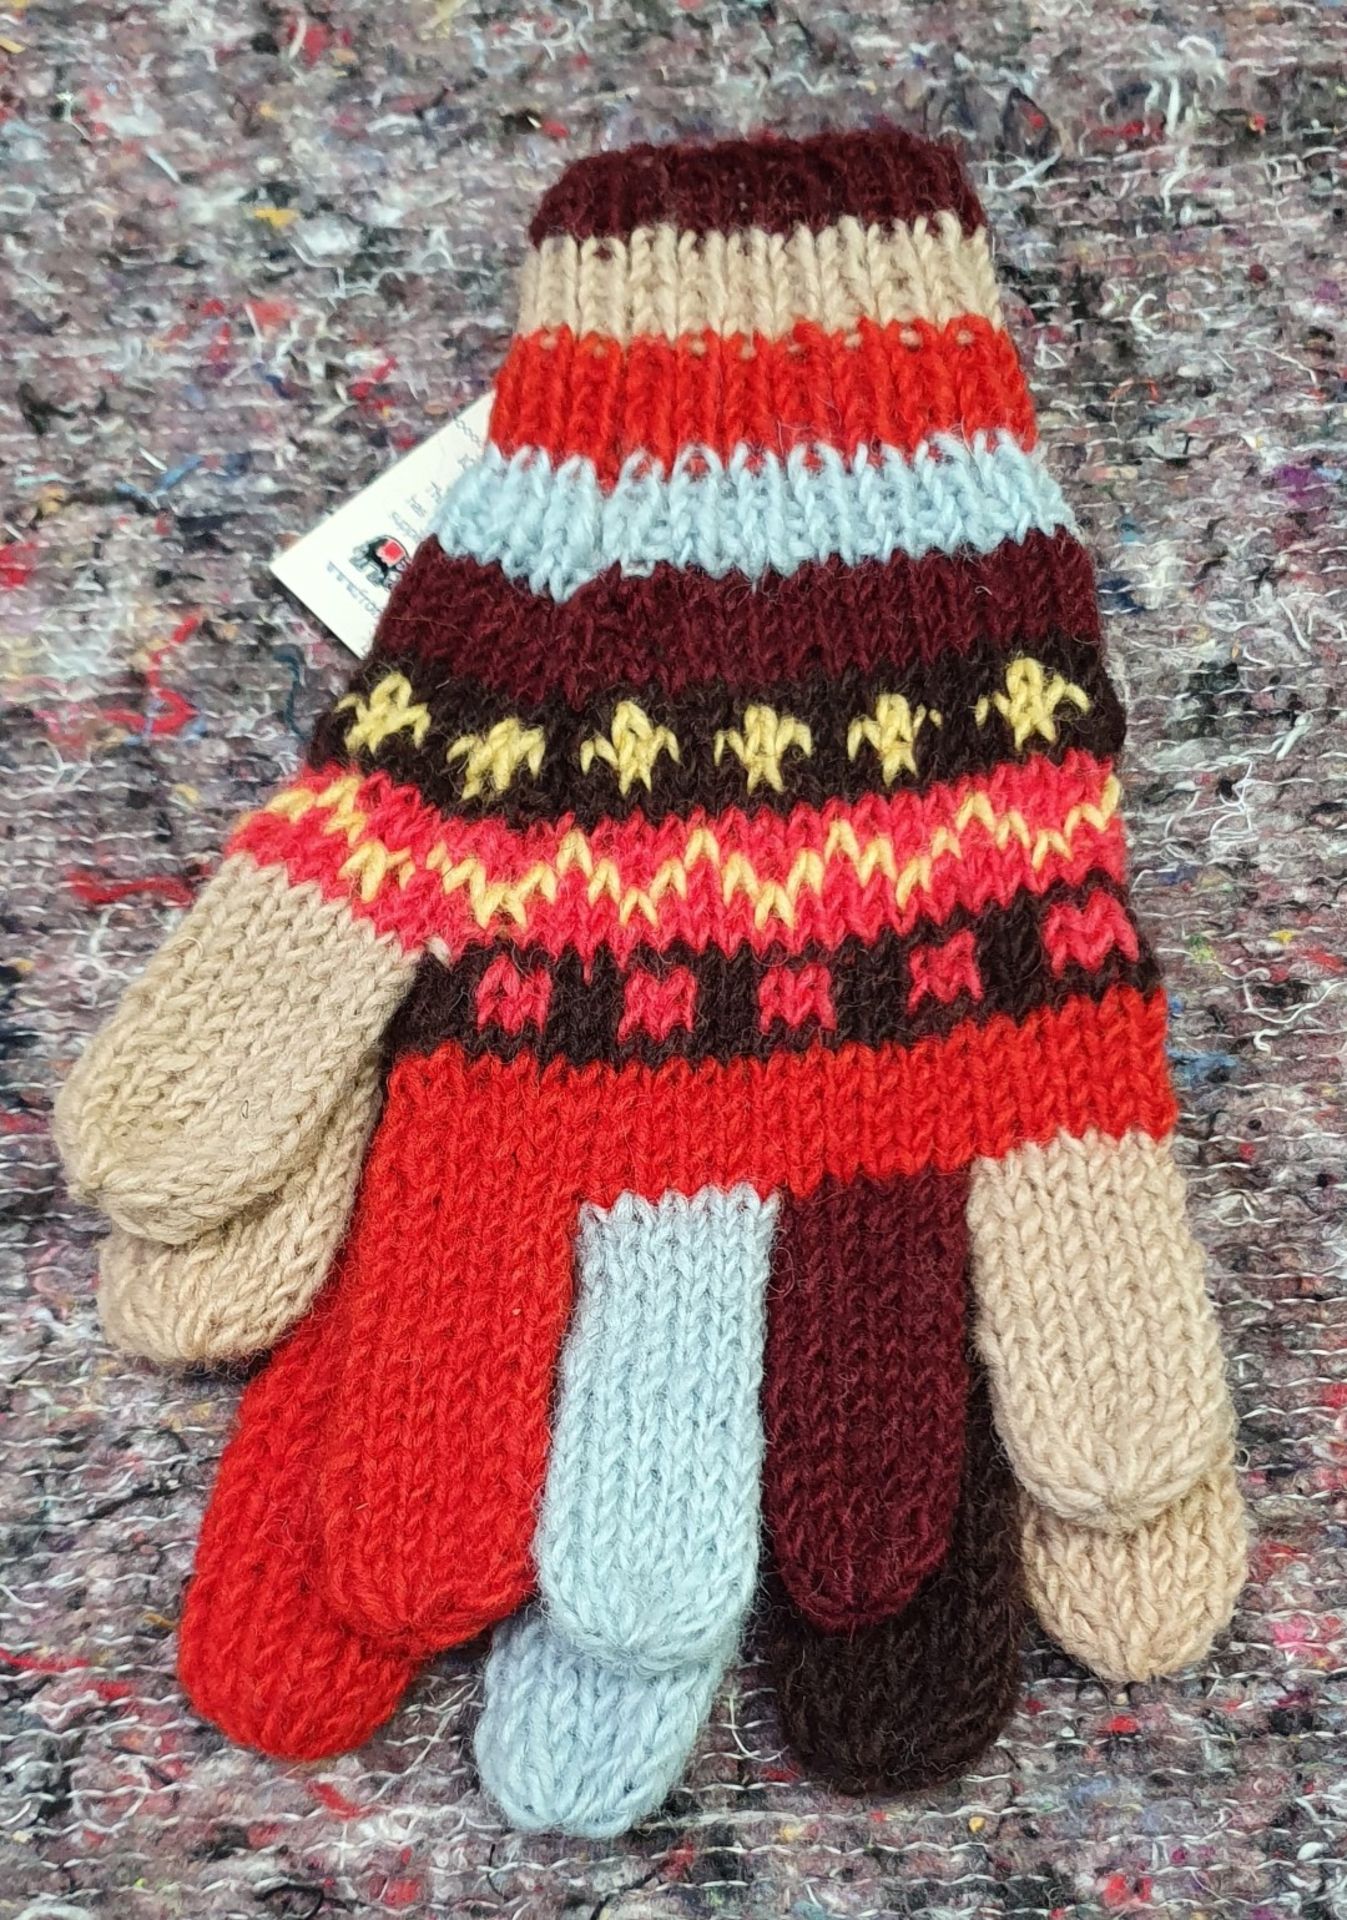 13 x Assorted Bobble Hats and Woolly Gloves by From The Source - New Stock - Ref: TCH236 - CL840 - - Image 23 of 24